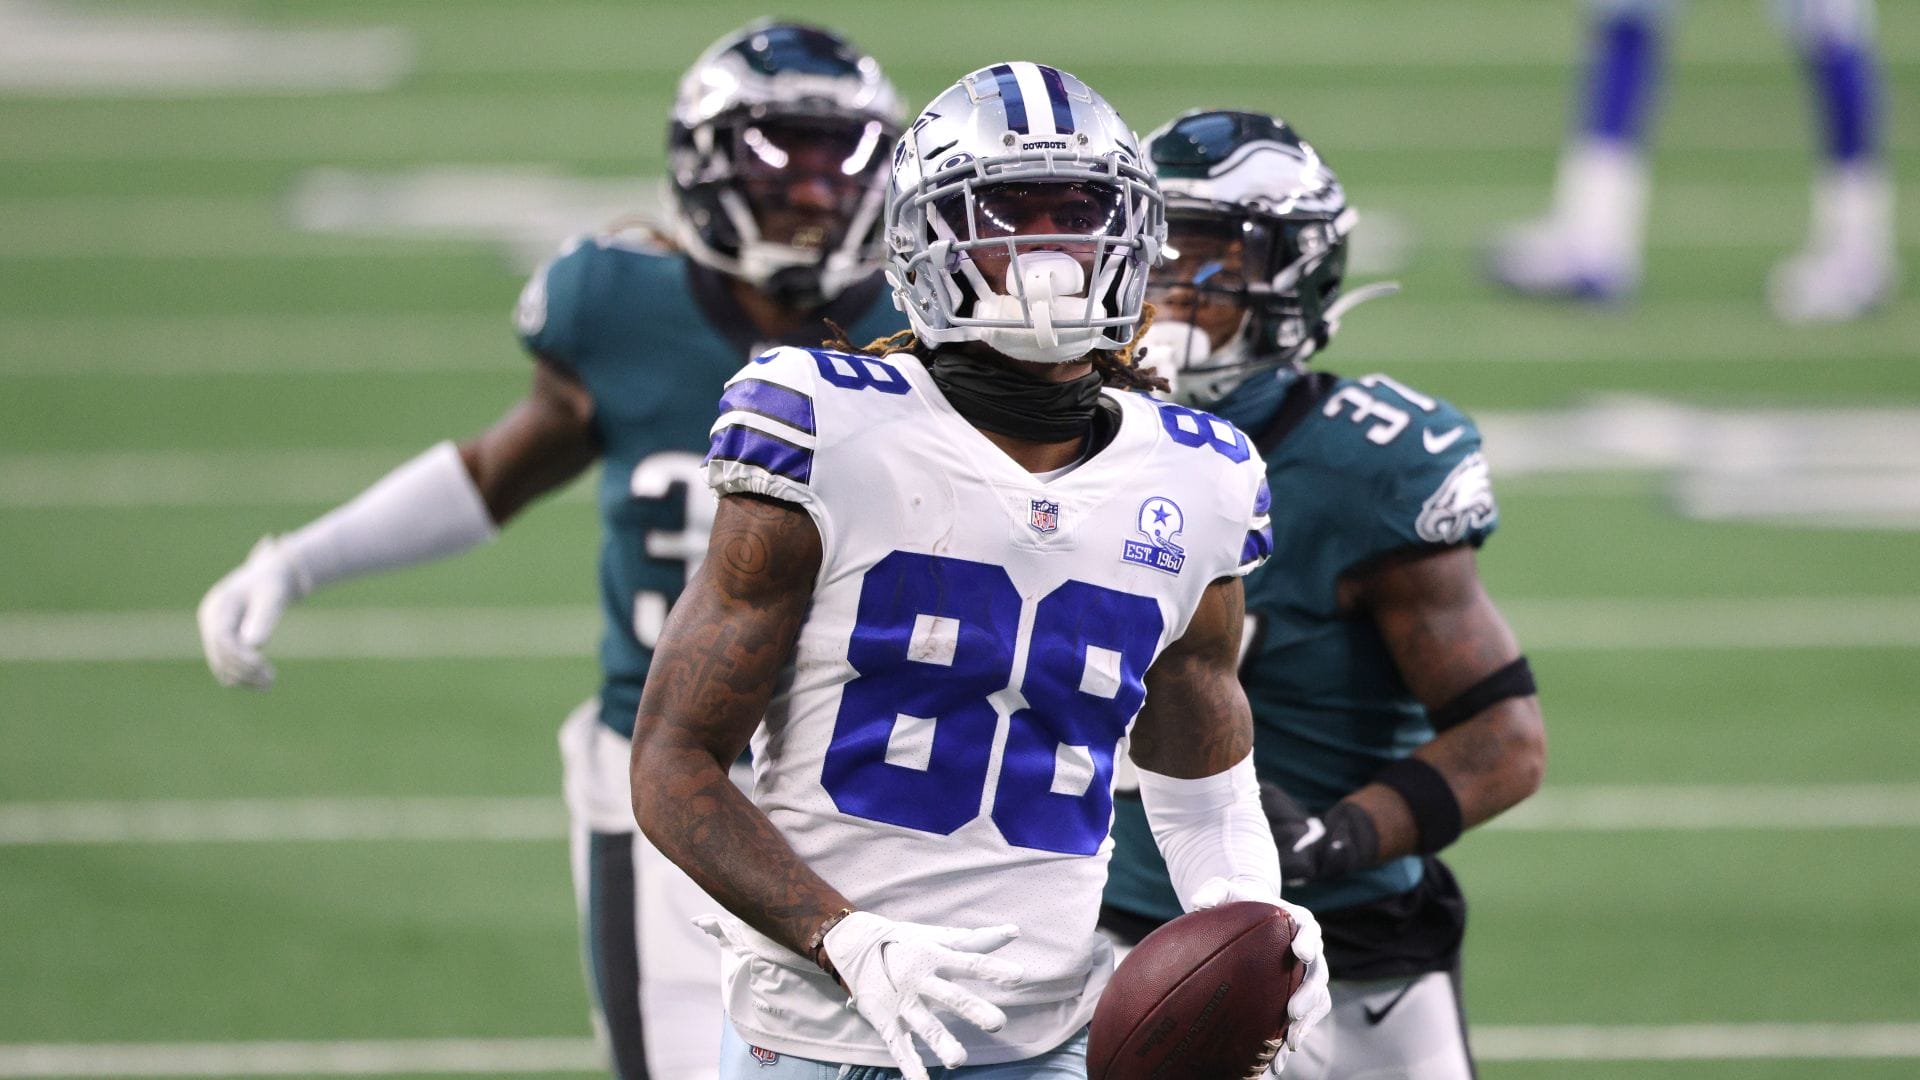 CeeDee Lamb #88 of the Dallas Cowboys scores a touchdown in the third quarter against the Philadelphia Eagles at AT&T Stadium on December 27, 2020 in Arlington, Texas. (Photo by Ronald Martinez/Getty Images)